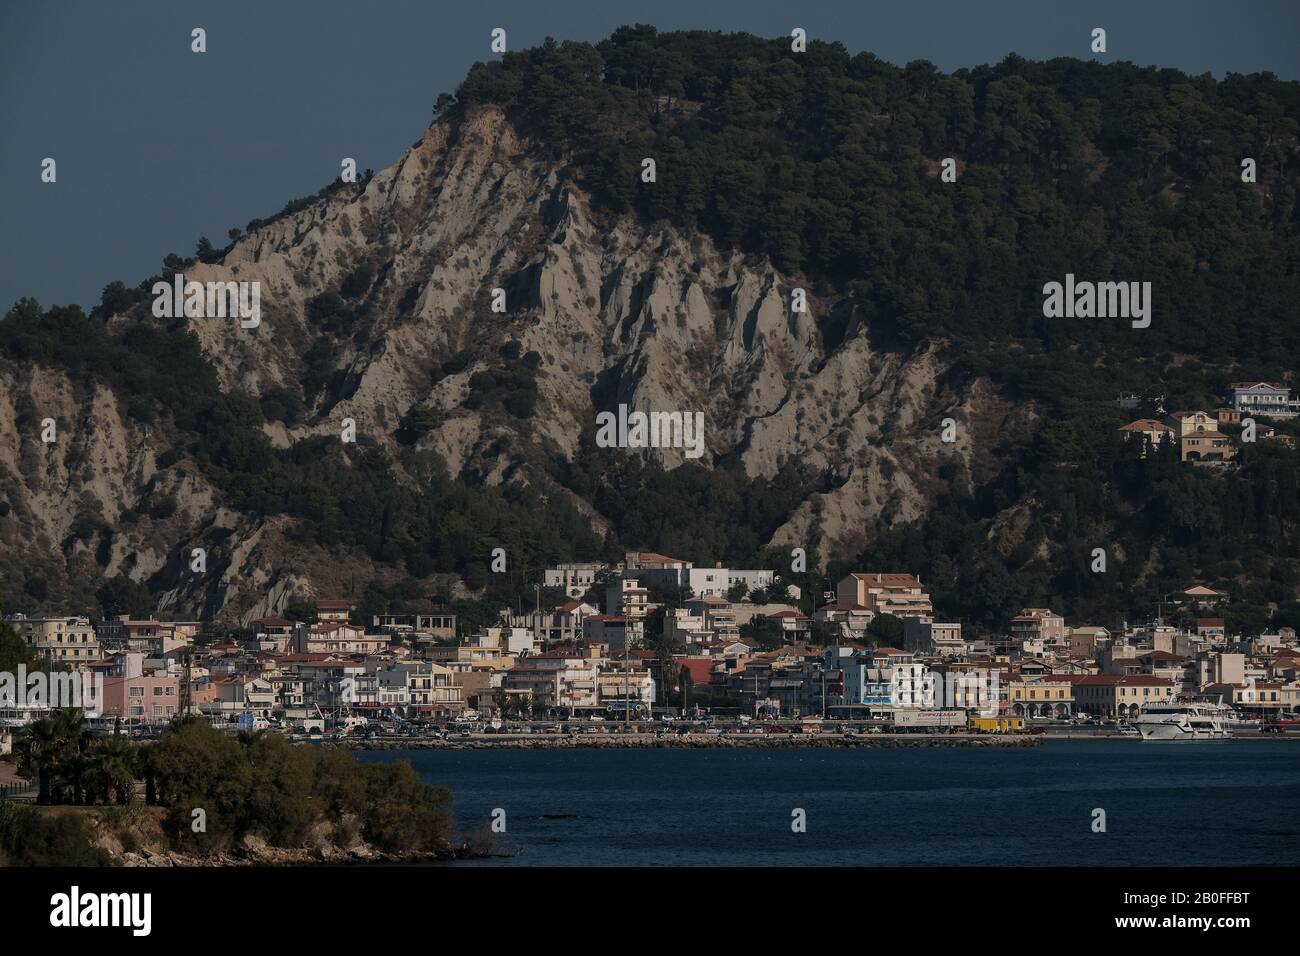 A long lens view of the port of Zakynthos town showing the buildings and harbour overlooked by the dominating limestone cliffs. Stock Photo